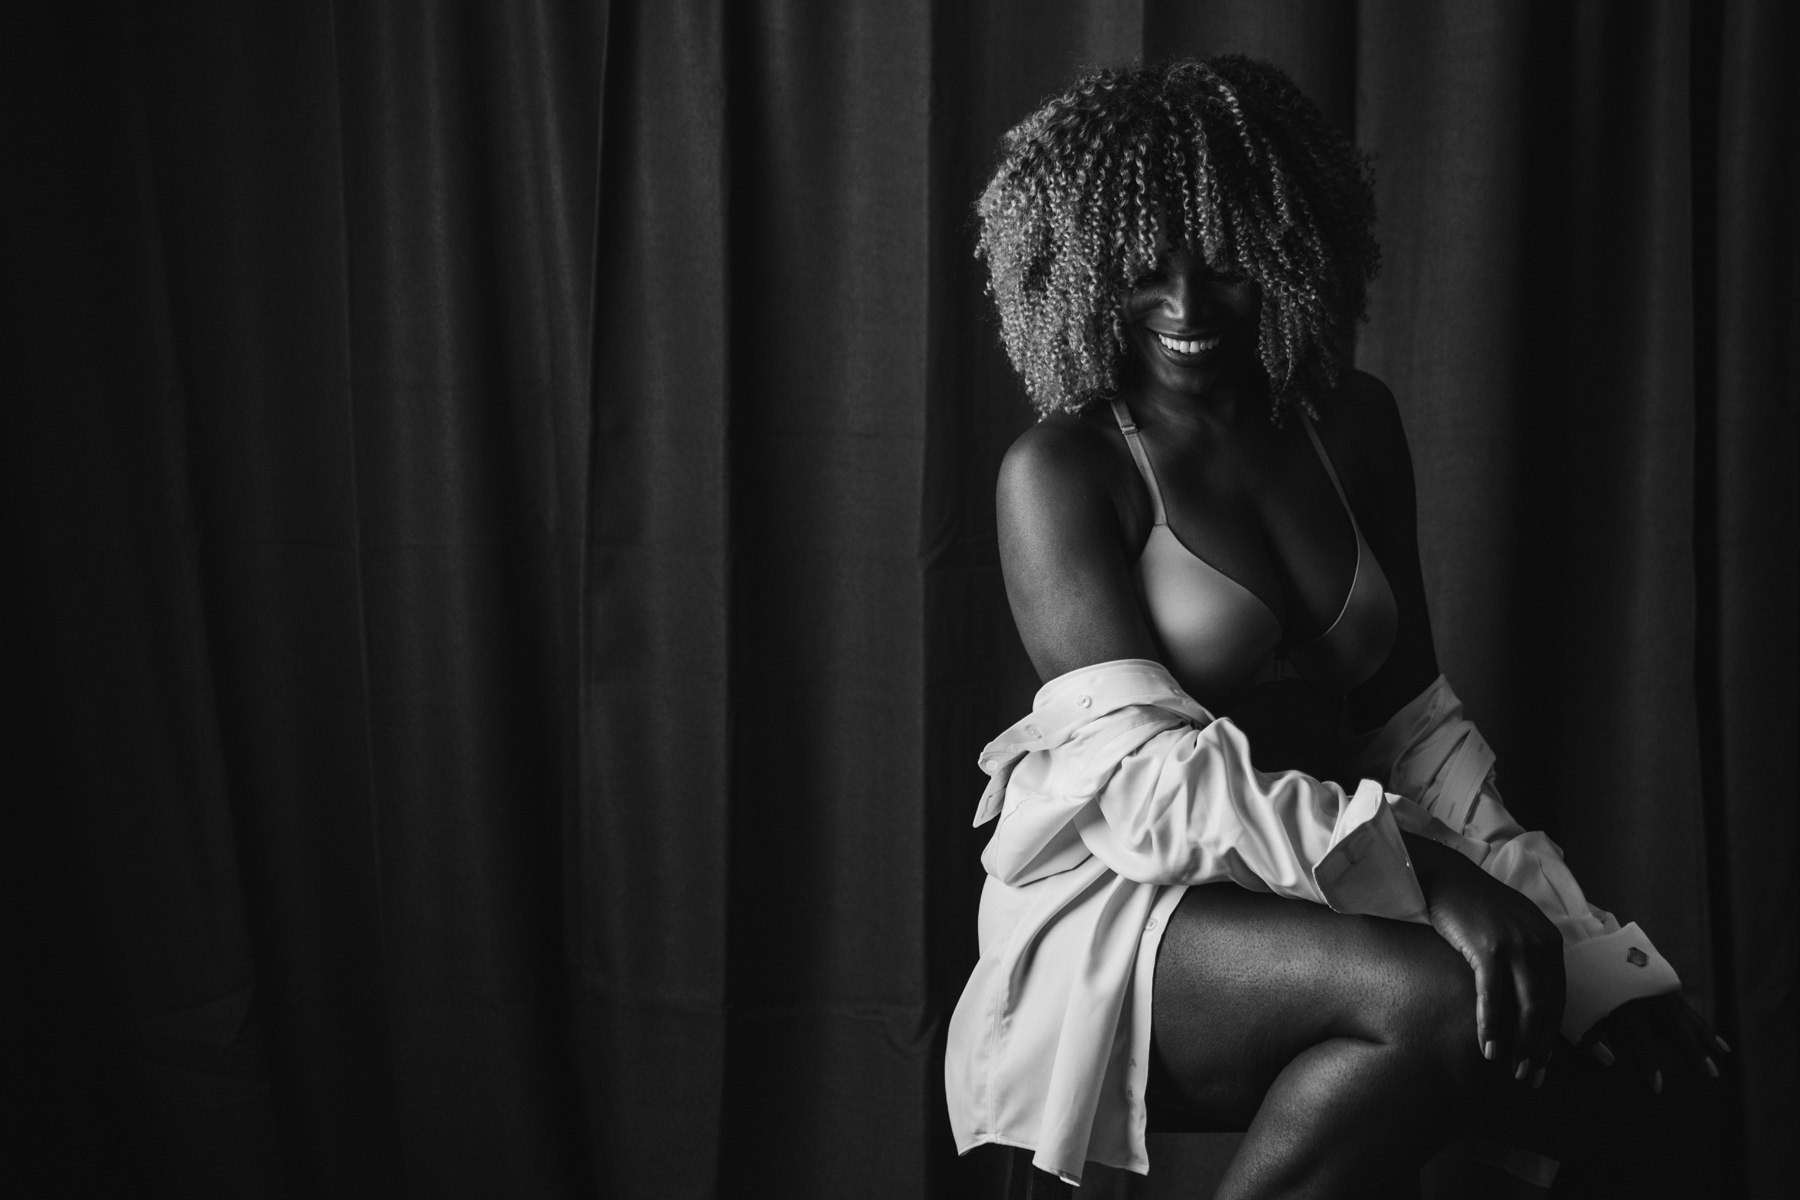 A confidently, gorgeous black woman sitting on a stool in her lingerie and man's white dress shirt while laughing during a boudoir session